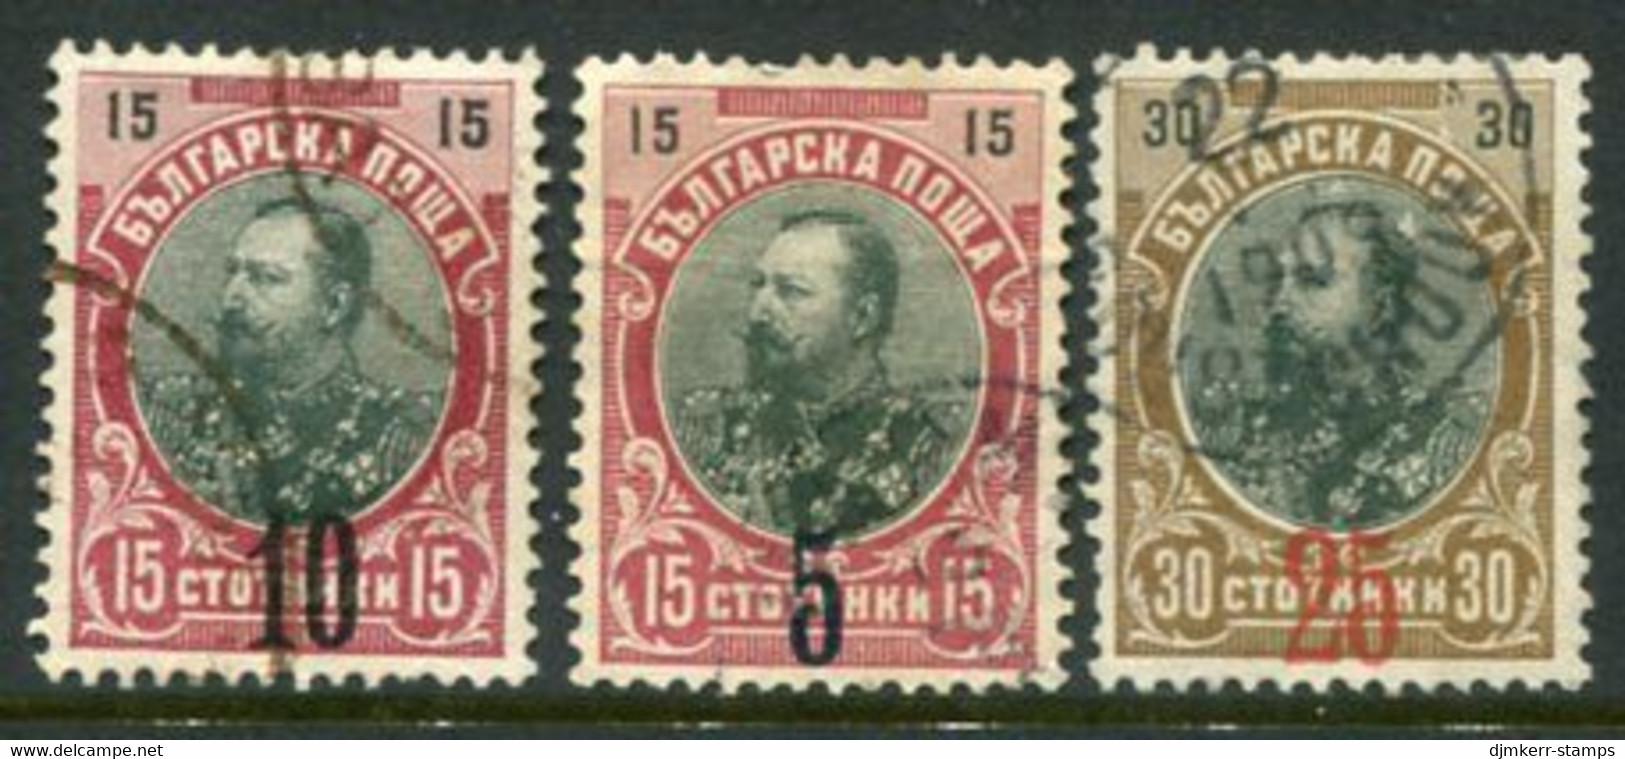 BULGARIA 1903-09  Surcharges 10 On 15 St. 5 On 15 St. And 25 On 30 St. Used.  Michel 65, 69-70 - Gebraucht